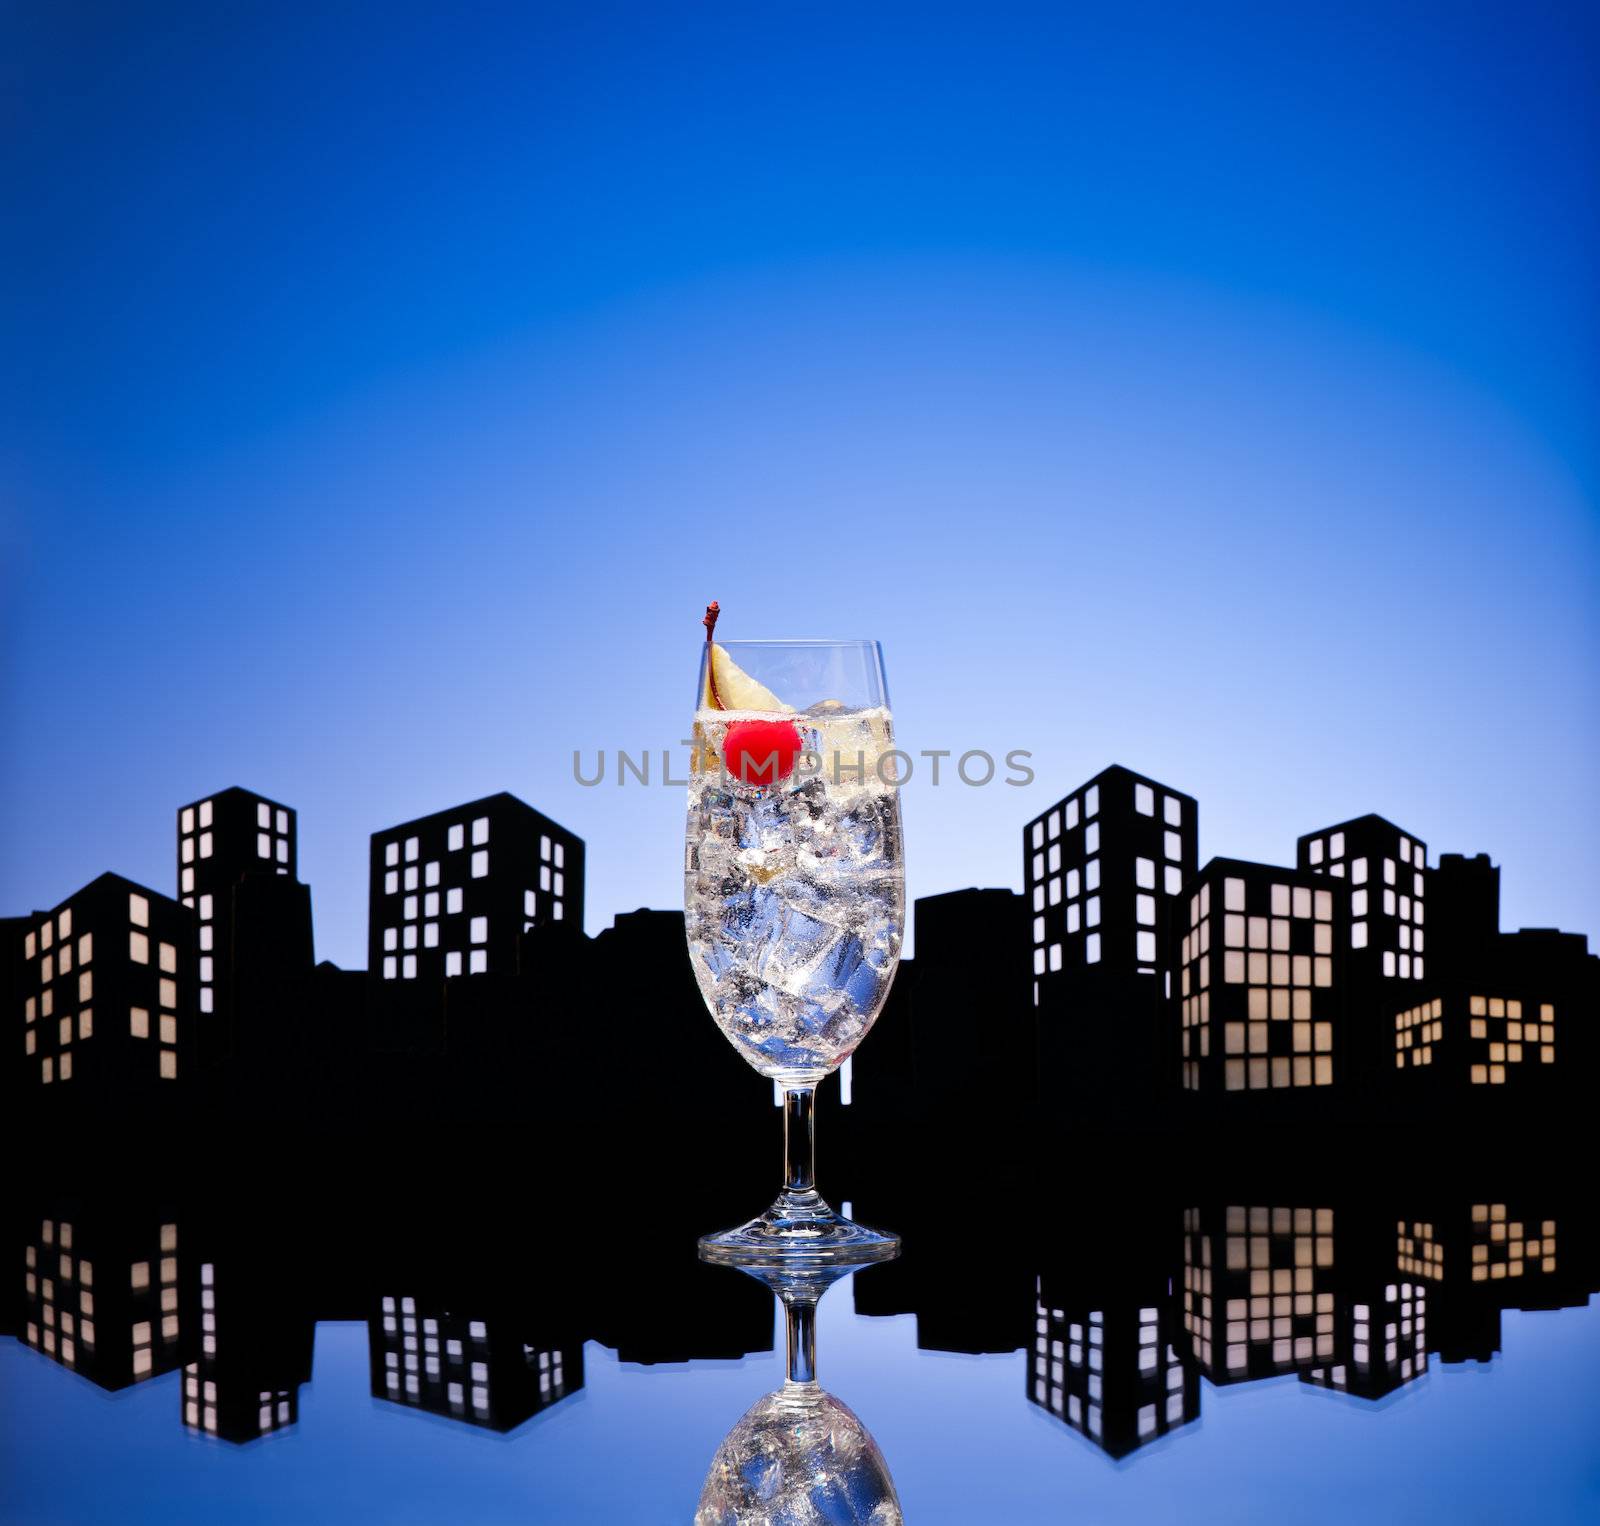 Metropolis tom collins or Gin Tonic cocktail cocktail in city skyline setting